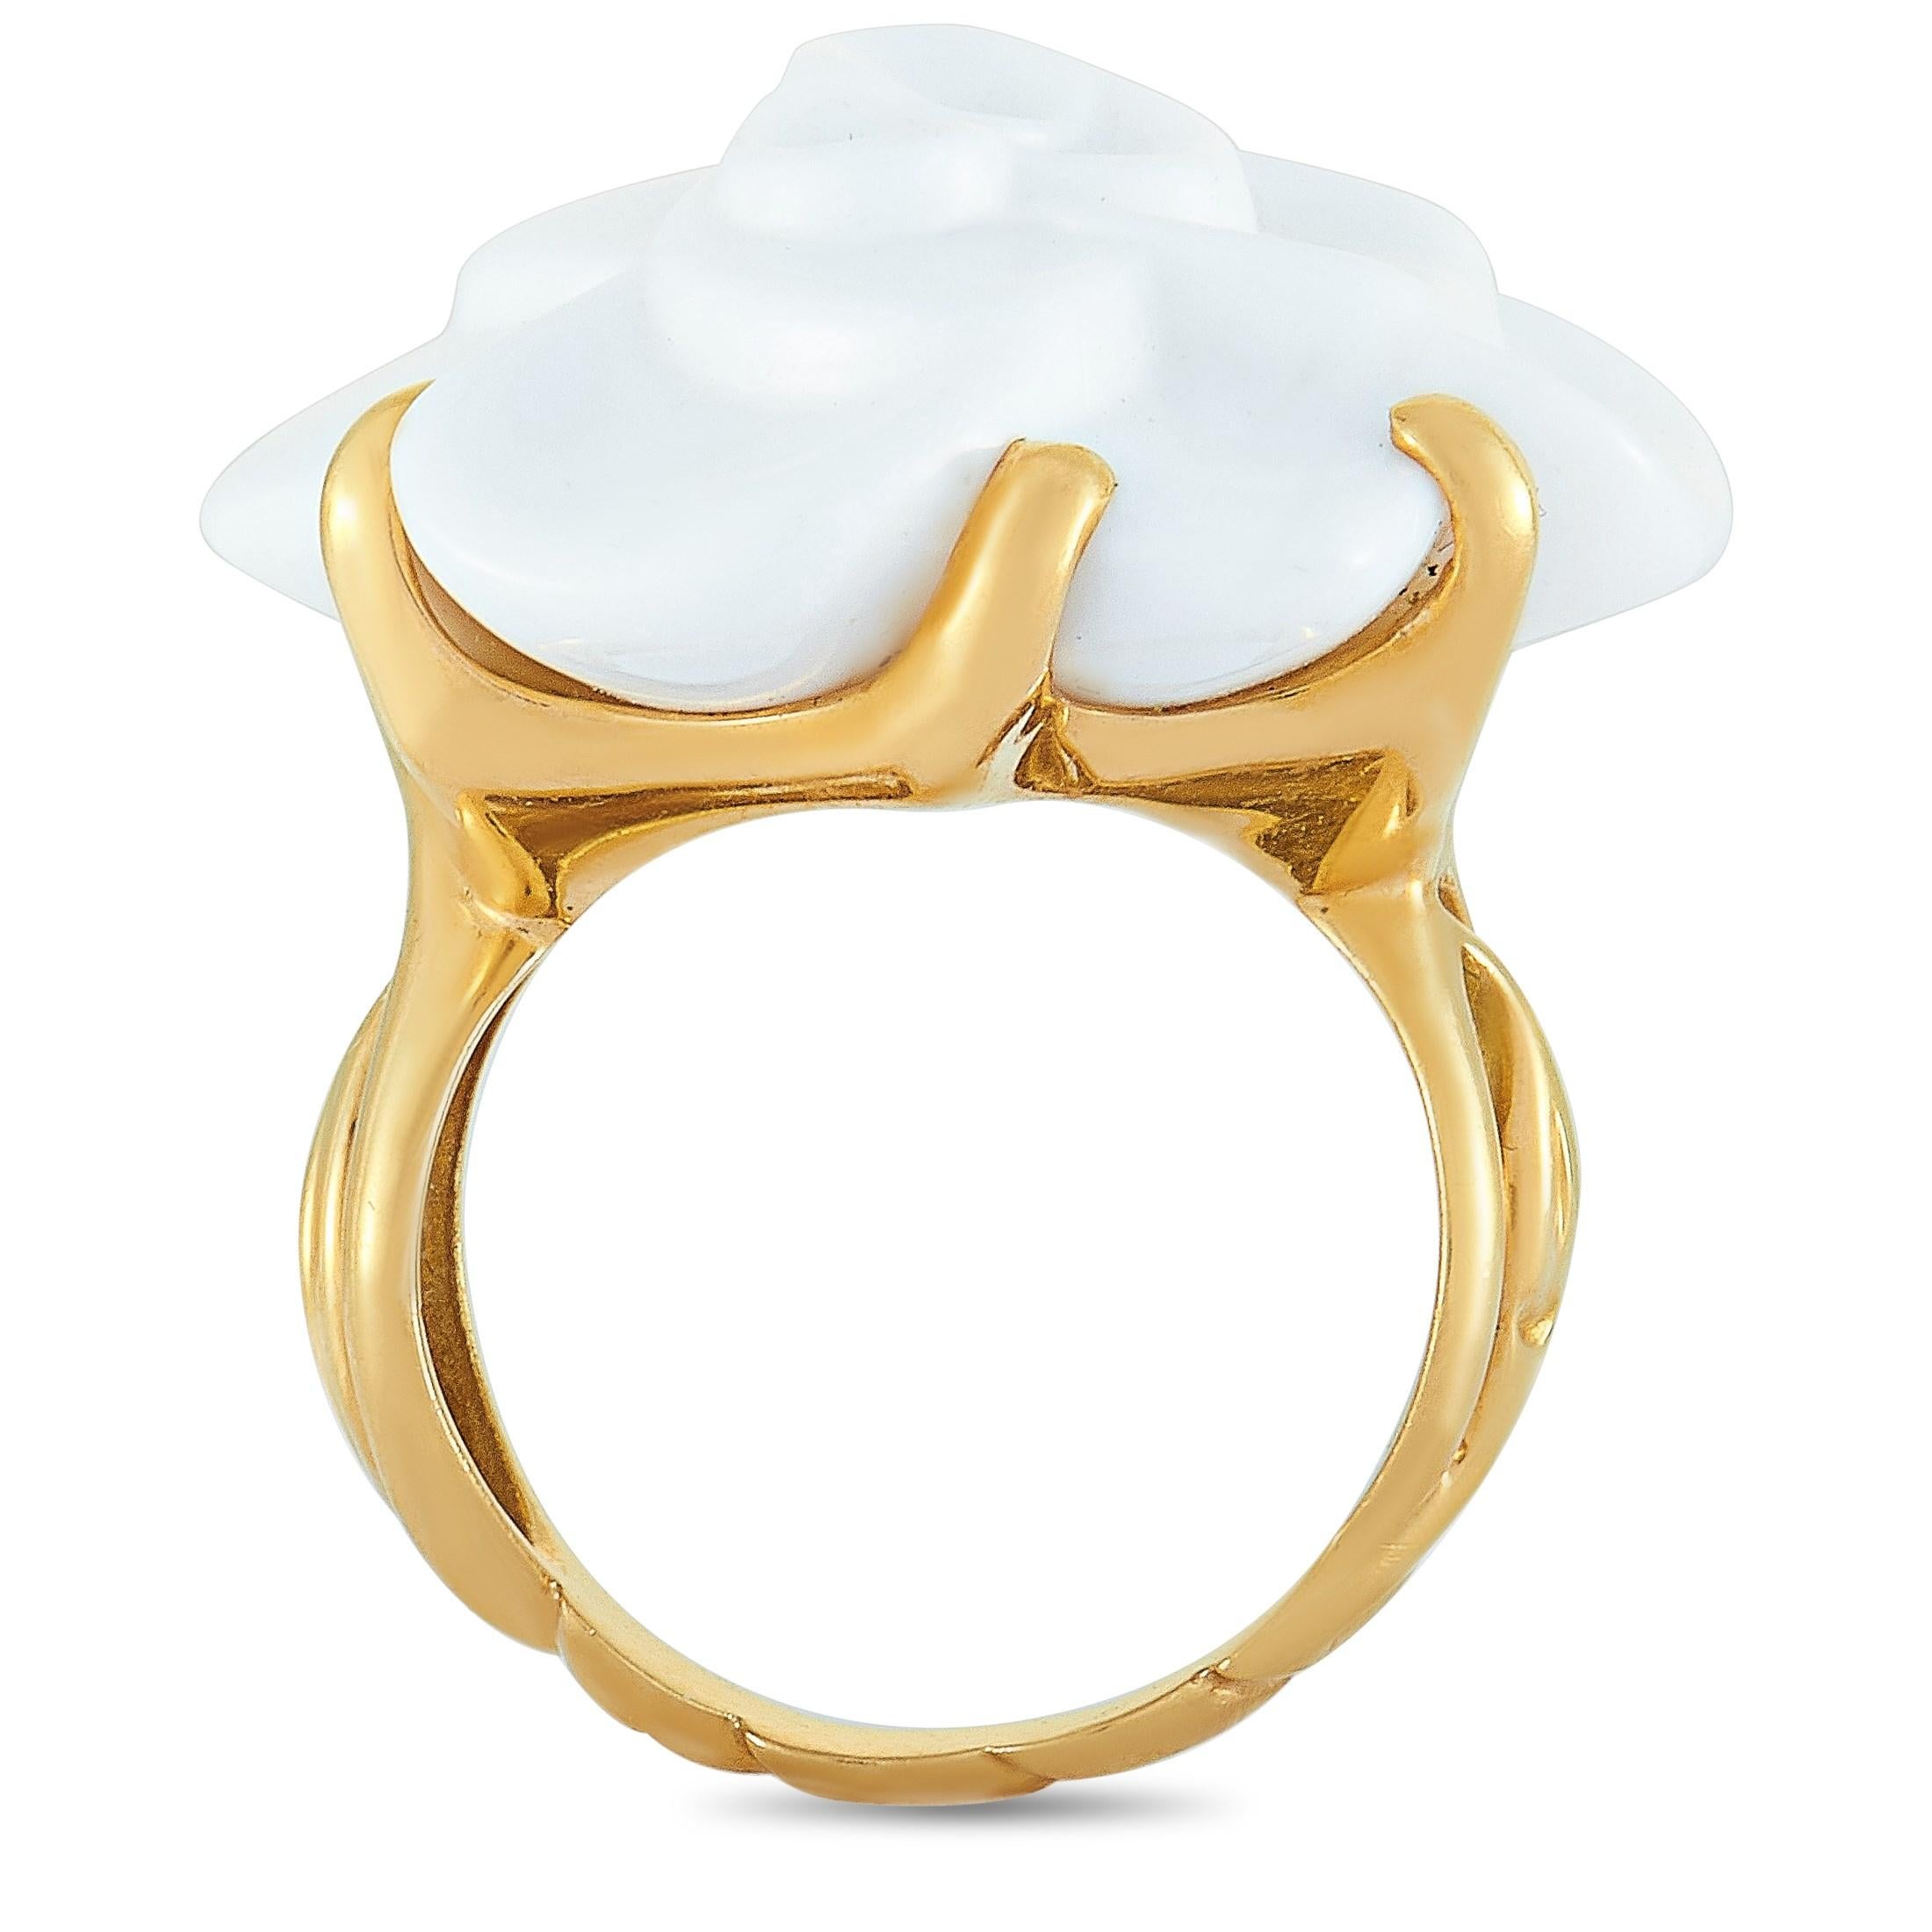 The Chanel “Camélia” ring is crafted from 18K yellow gold and boasts band thickness of 3 mm and top height of 12 mm, while top dimensions measure 26 by 23 mm. The ring is set with a white agate and weighs 22.3 grams.

This jewelry piece is offered